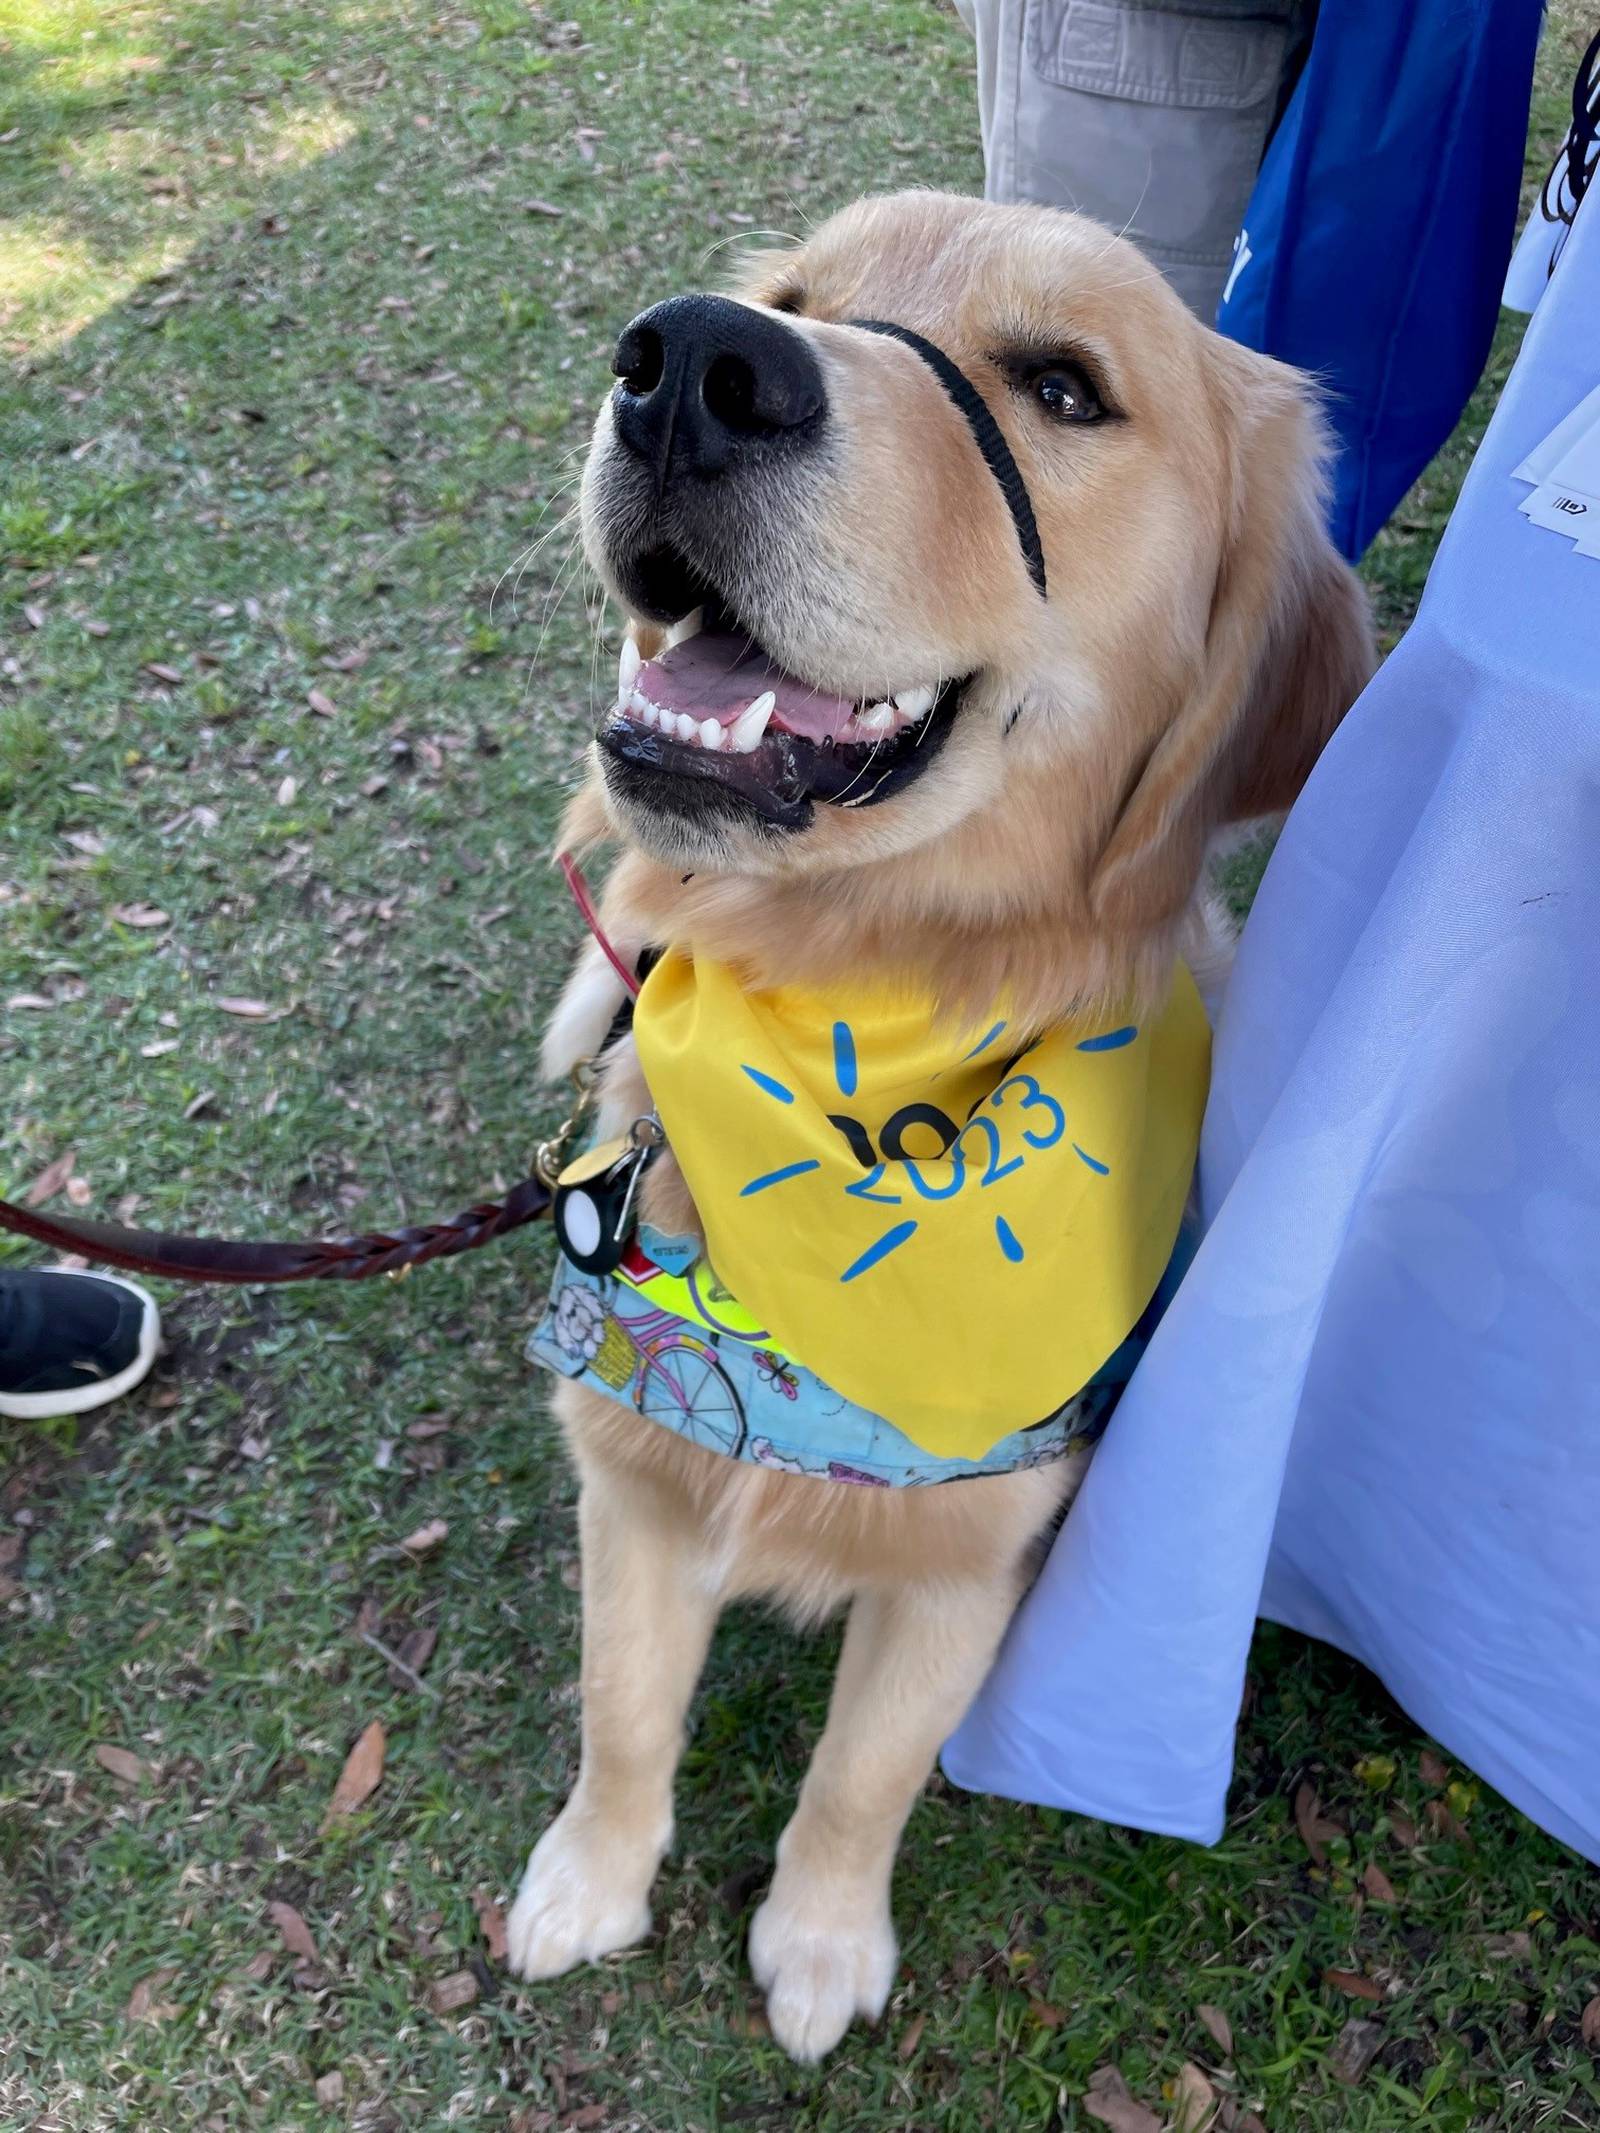 DogFest Orlando supports local service dogs, raises money for mission